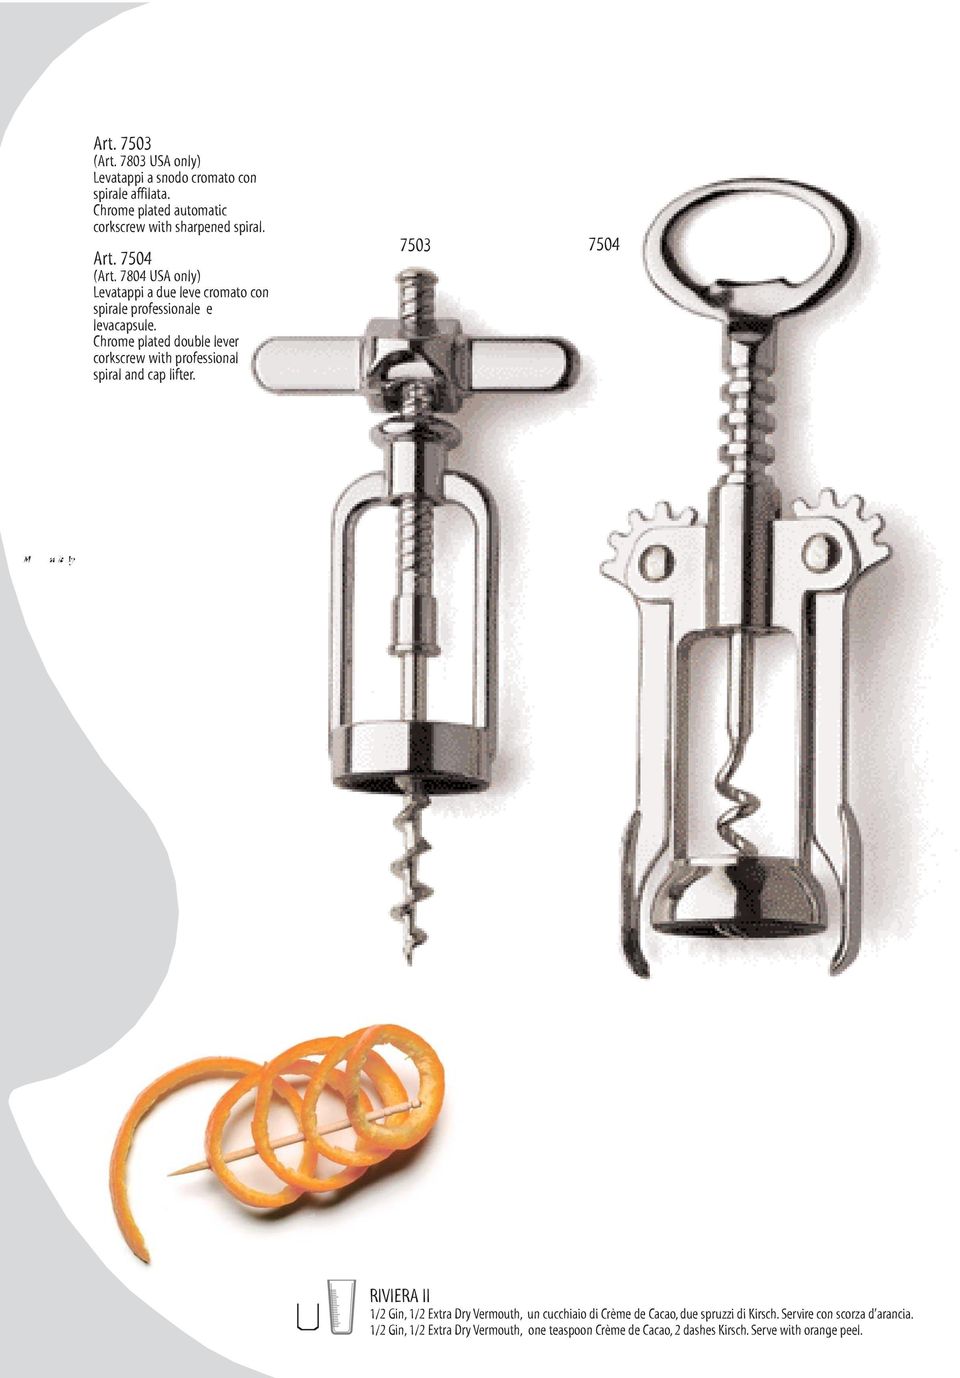 Chrome plated double lever corkscrew with professional spiral and cap lifter.